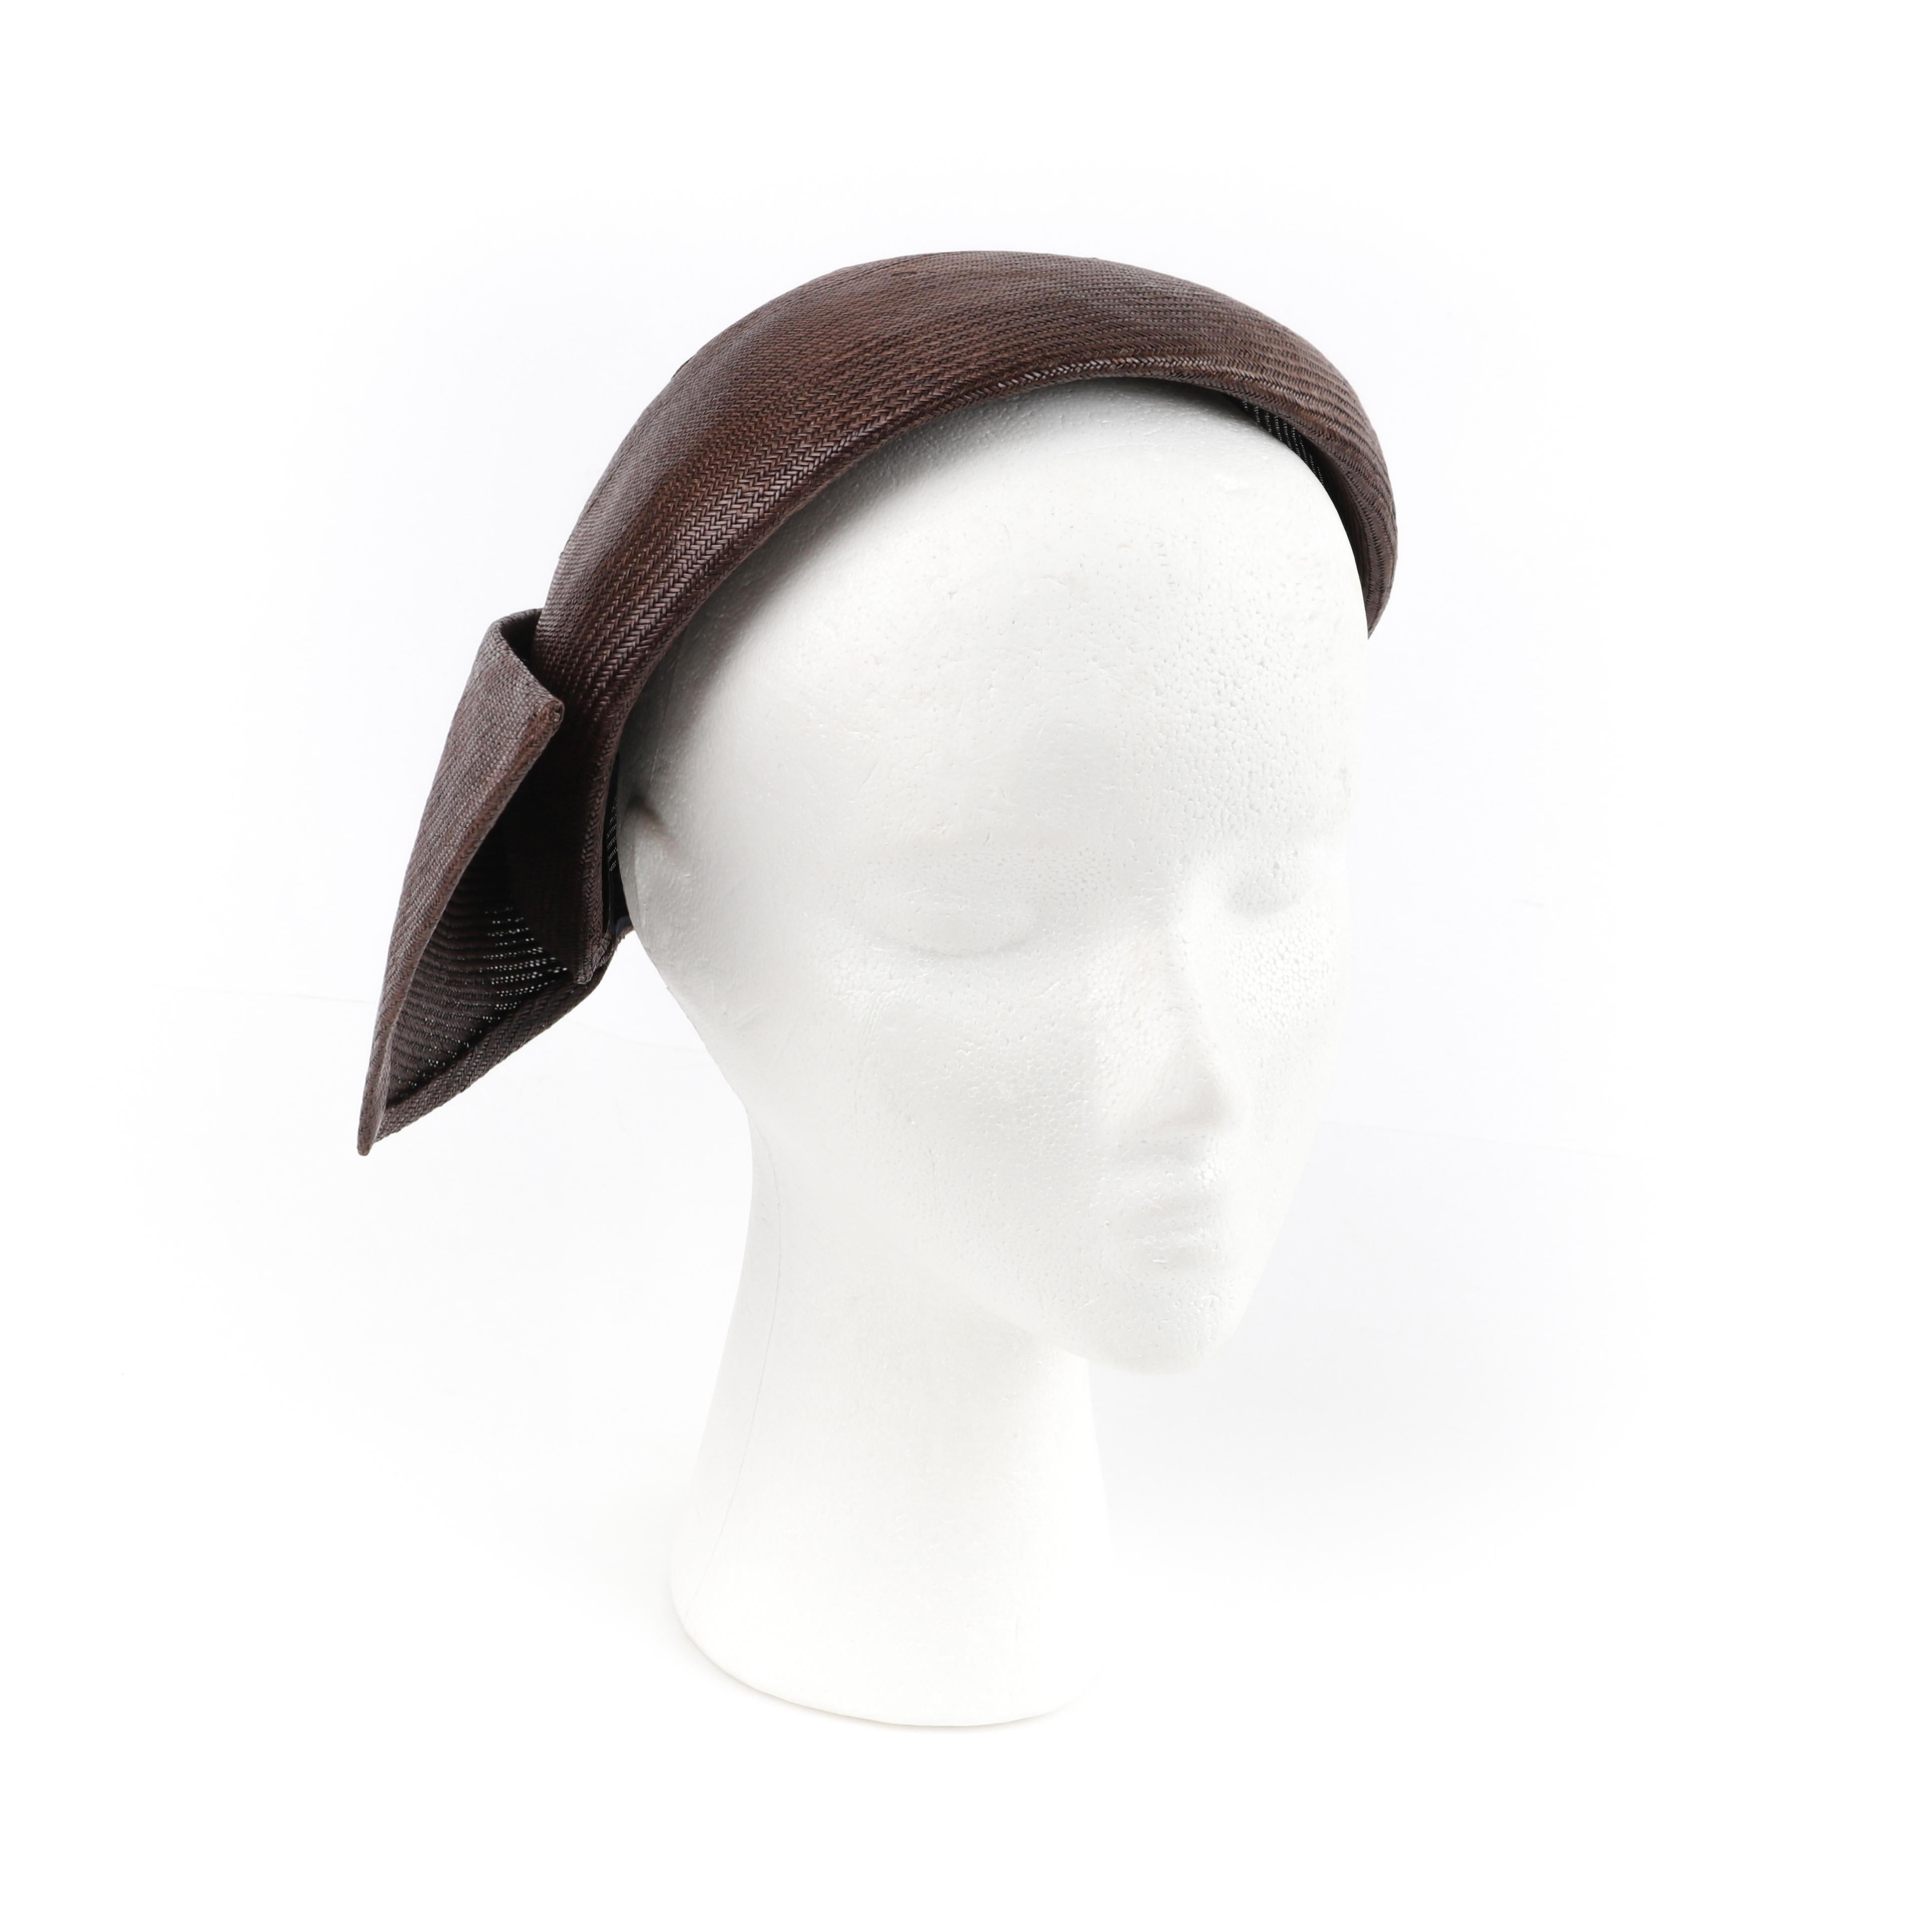 CHRISTIAN DIOR c.1950s Brown Woven Straw Sweeping Knife Pleat Crown Cap Hat
 
Circa: 1950’s
Label(s): Christian Dior New York Original
Designer: Christian Dior
Style: Half hat / crown cap
Color(s): Shades of warm brown (exterior, interior)
Lined: